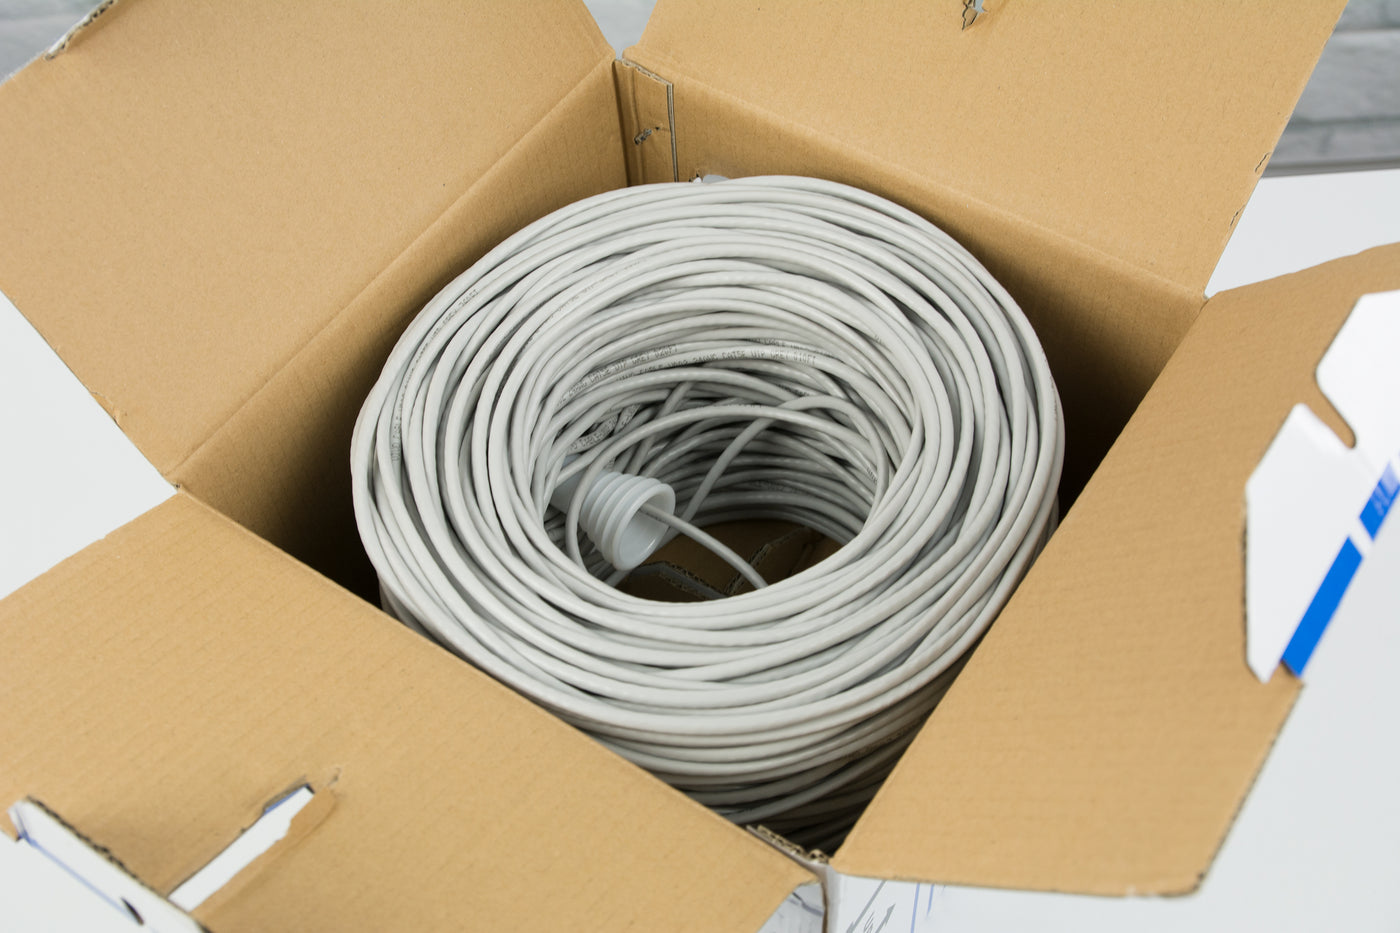 Grey 500ft Cat5e Ethernet Cable